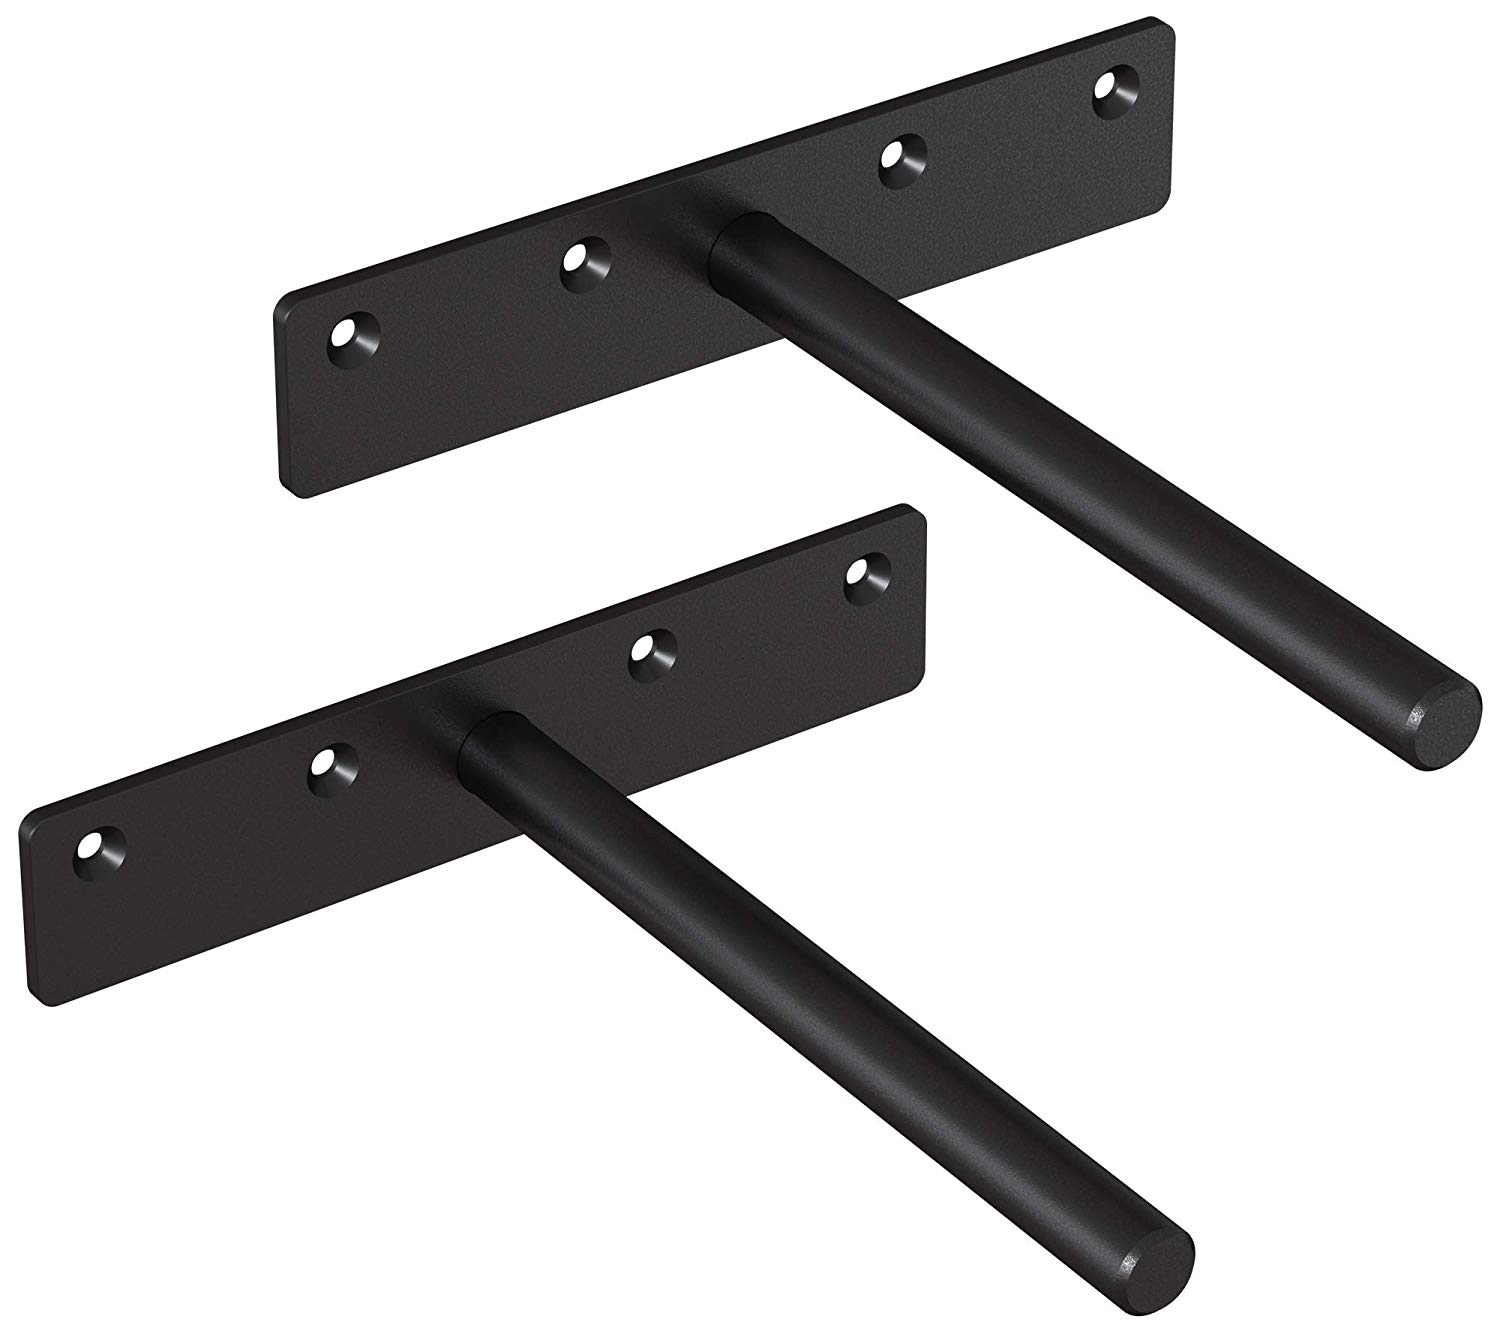 tibres floating shelf brackets heavy duty invisible hidden for wooden rustproof blind supports solid steel concealed set weathered wood fireplace surround shelves with iron